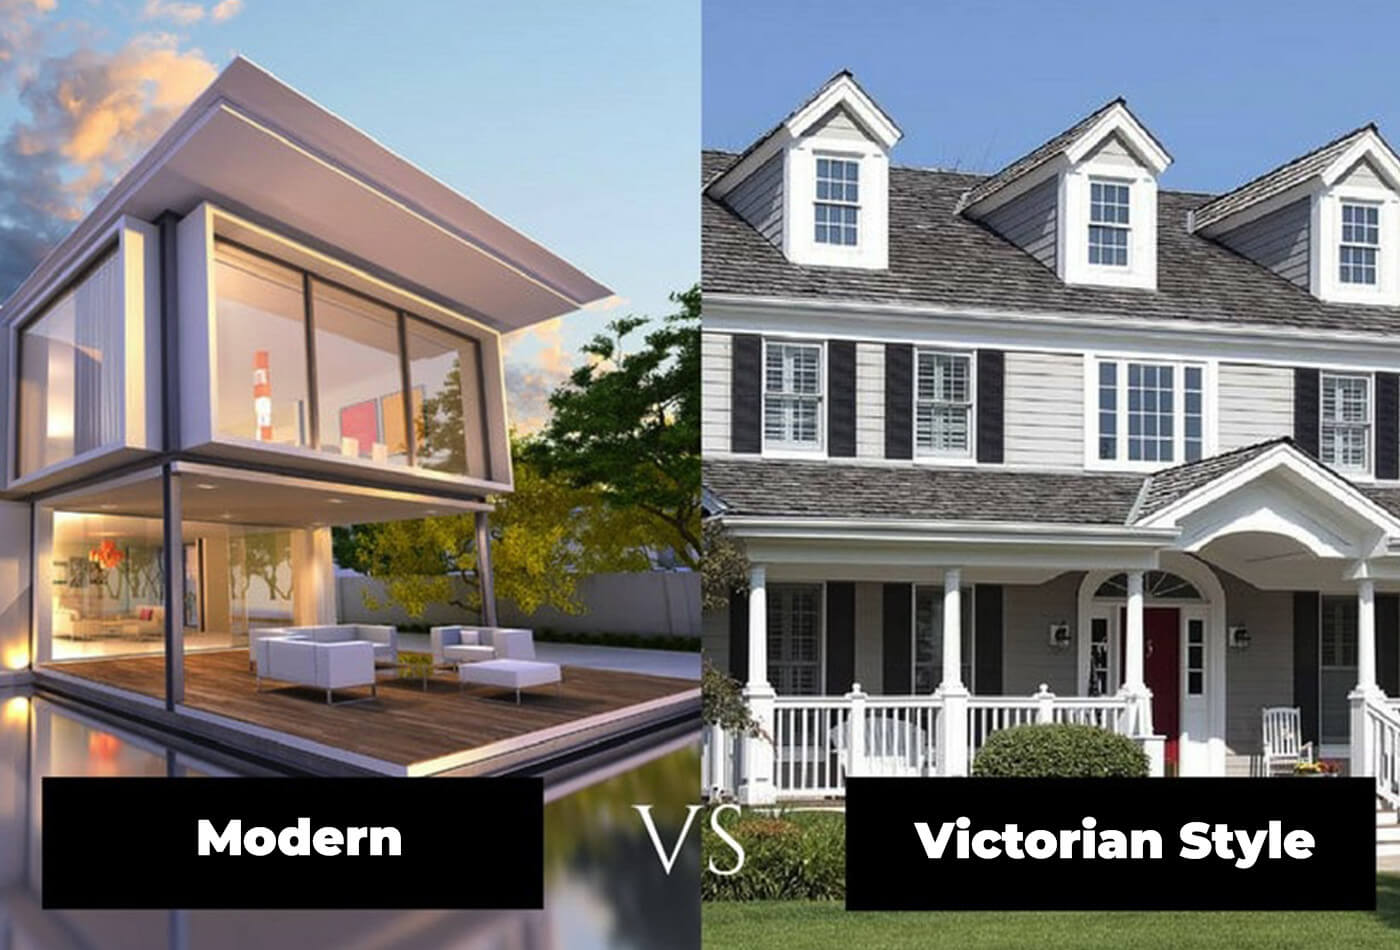 Modern Home vs Victorian Style Home